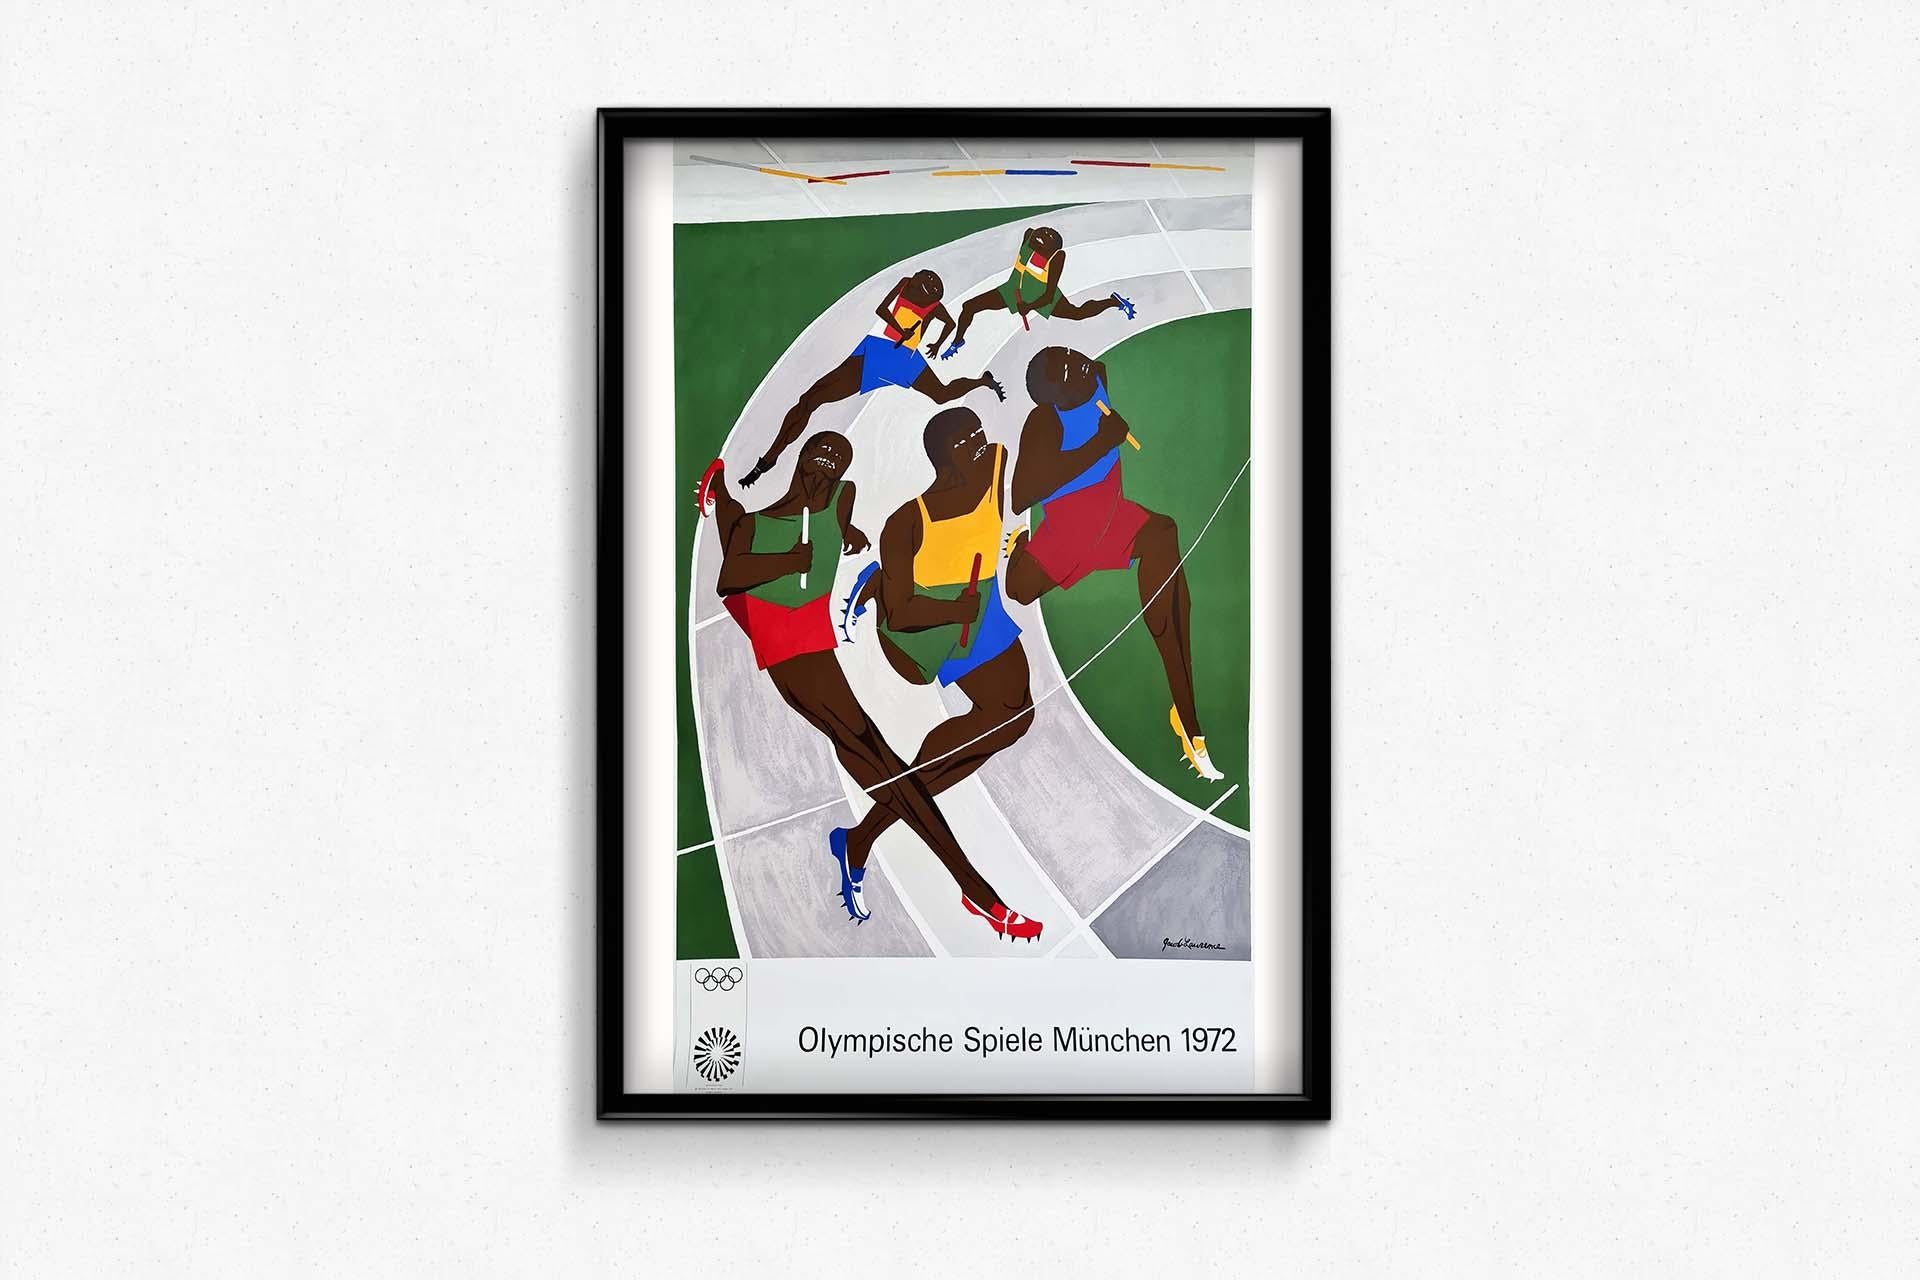 Original poster made in 1972 by Jacob Lawrence to promote the Olympic Games that took place in Munich that year.

Jacob Lawrence's bold, graphic paintings give their African American subjects great emotional depth. The artist's socially engaged and